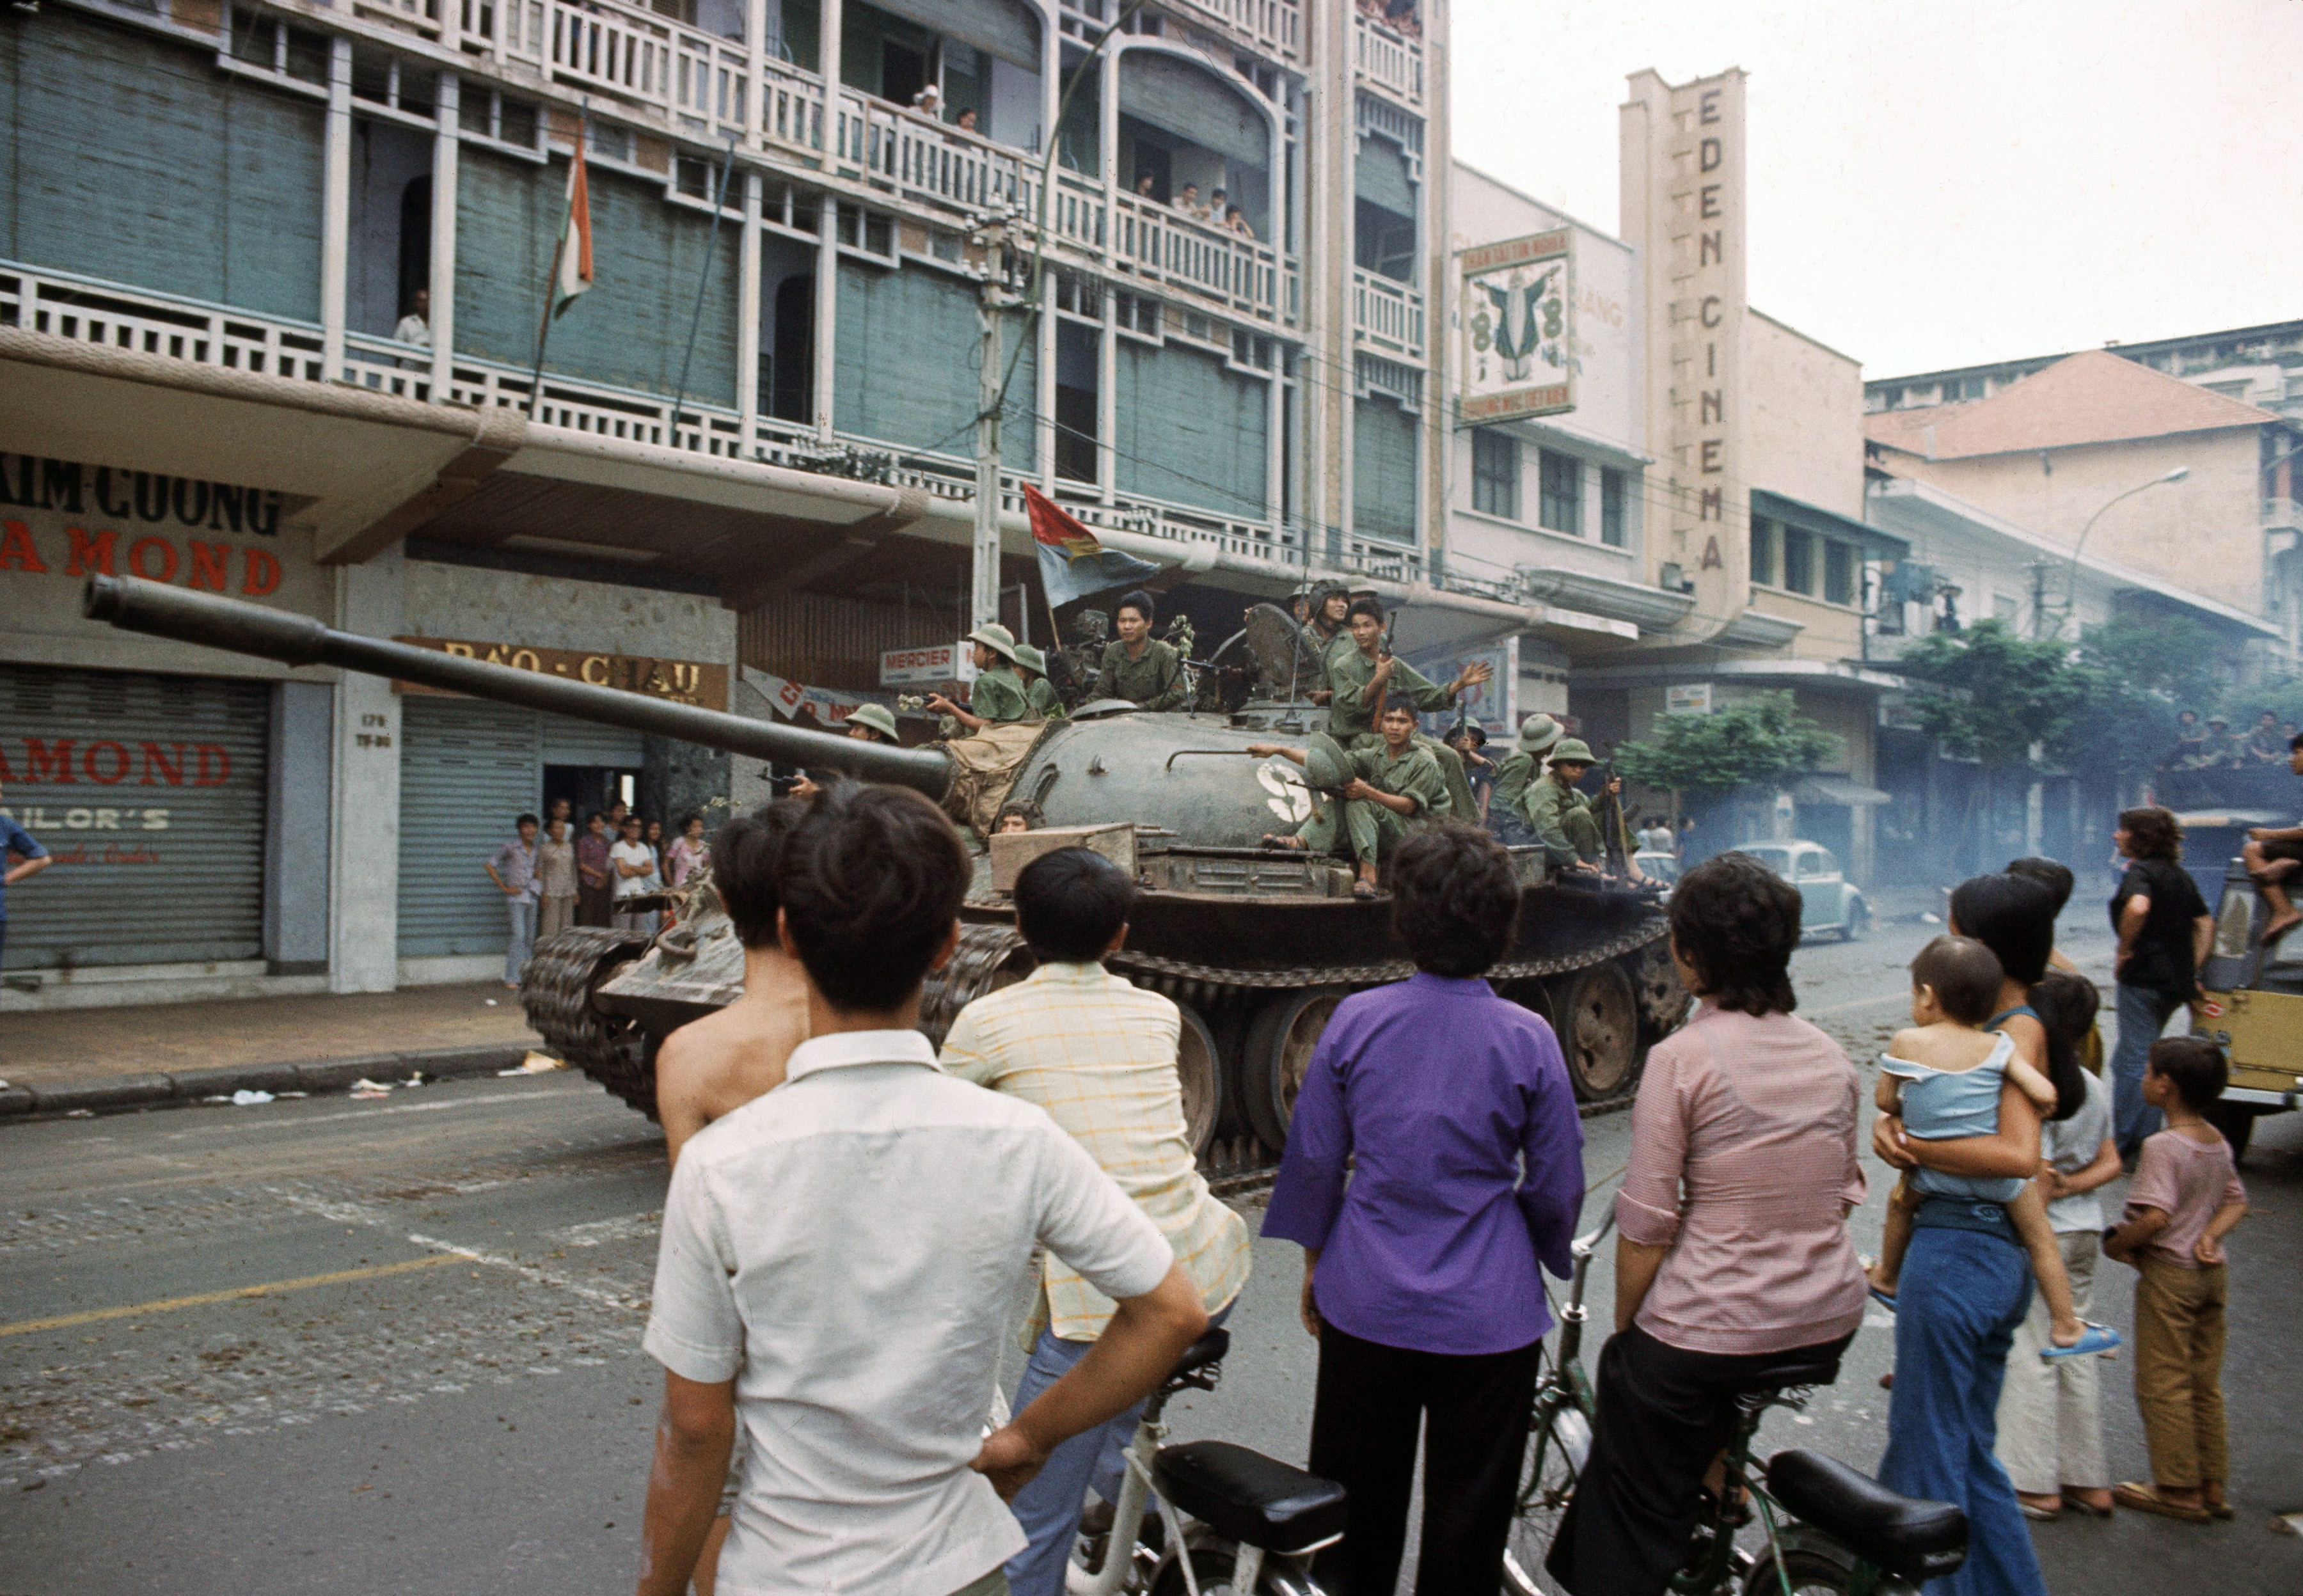 Victorious North Vietnamese troops ride a tank down Rue Catinat in Saigon while South Vietnamese civilians look on, April 30, 1975, as the capital of South Vietnam fell to communist forces, ending the Vietnam War. (AP Photo/Yves Billy)